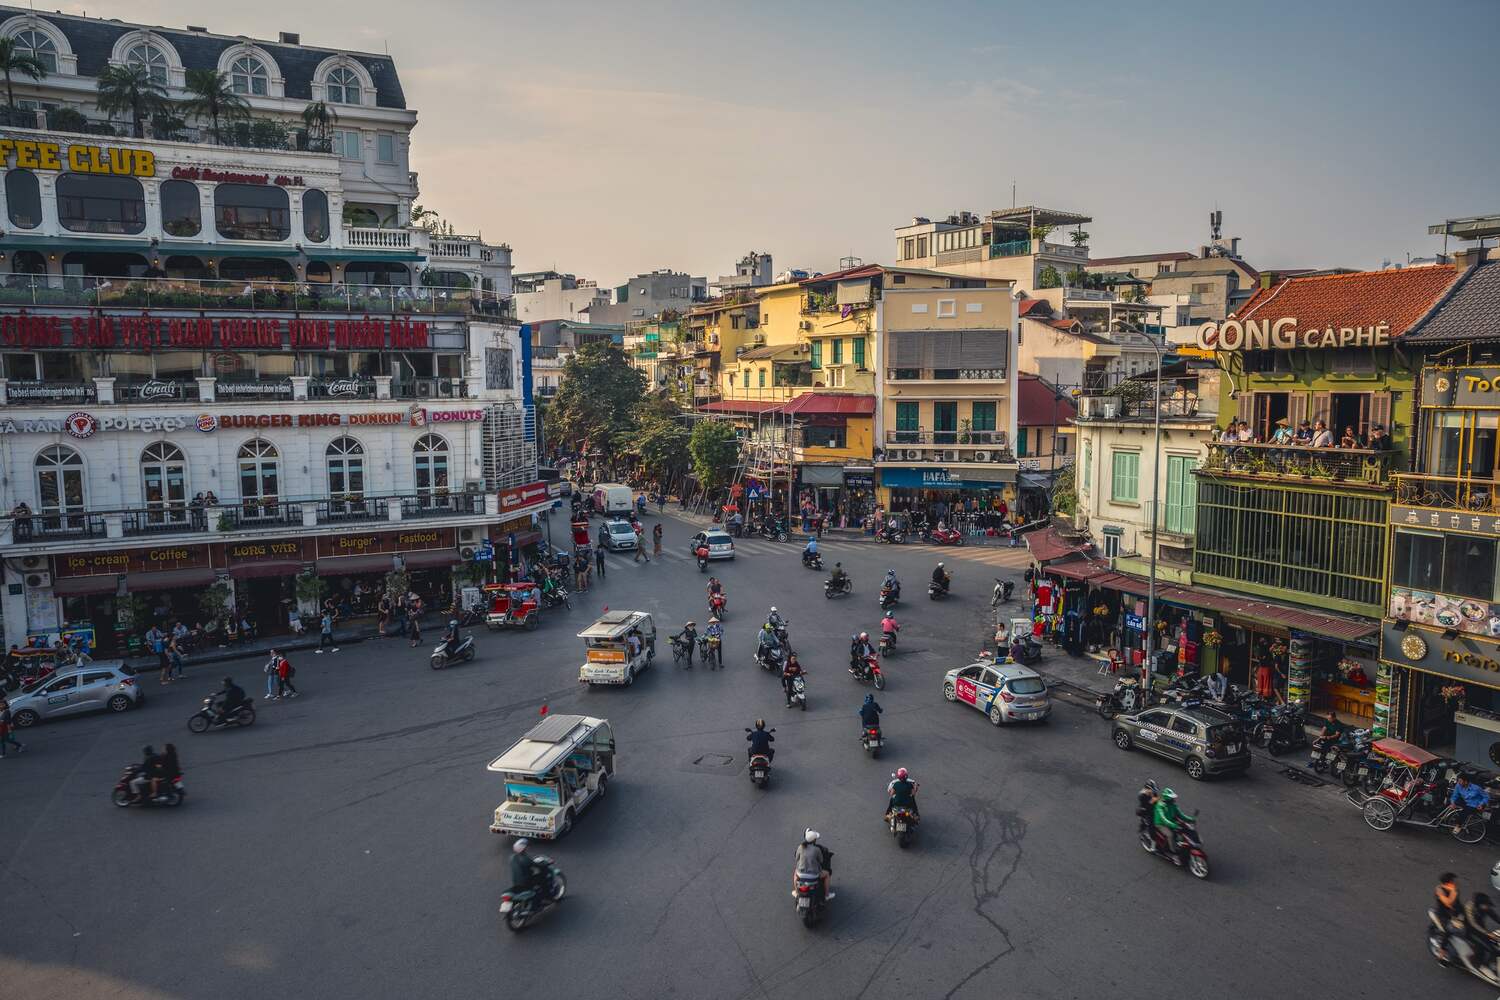 Bustling roundabout in Hanoi, Vietnam, with motorbikes and cars amid colonial and modern buildings